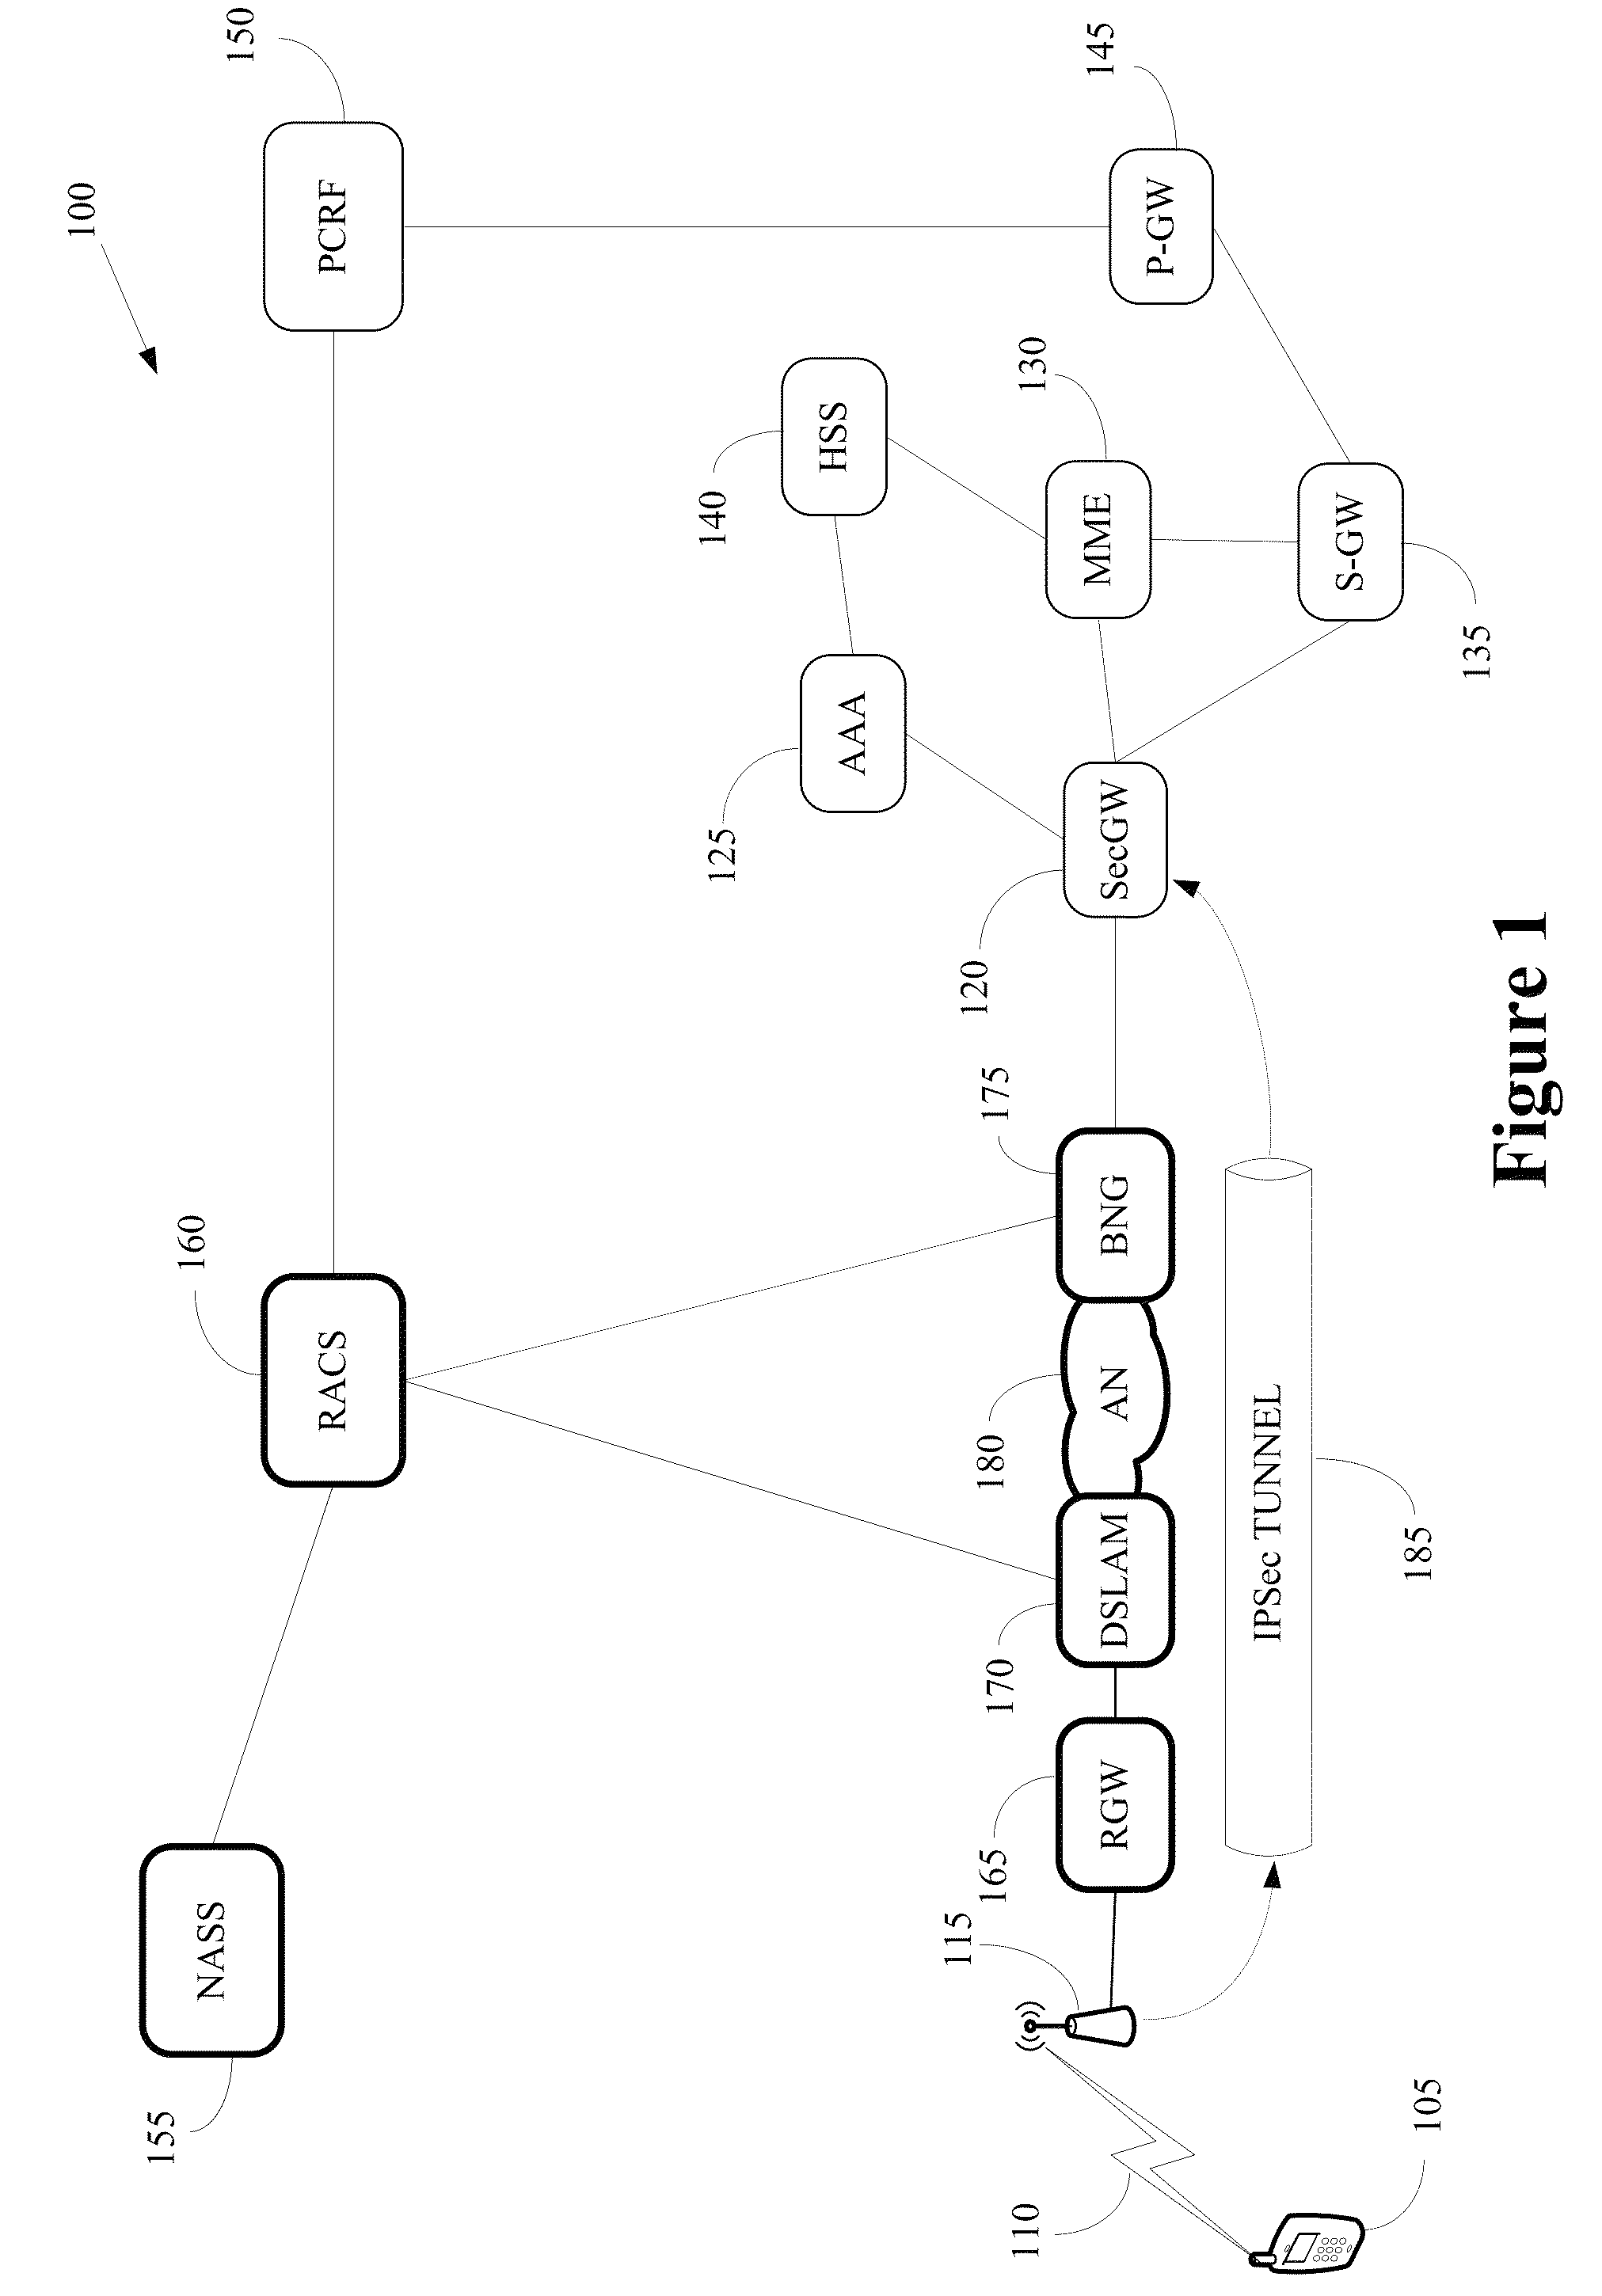 Method of call admission control for home femtocells